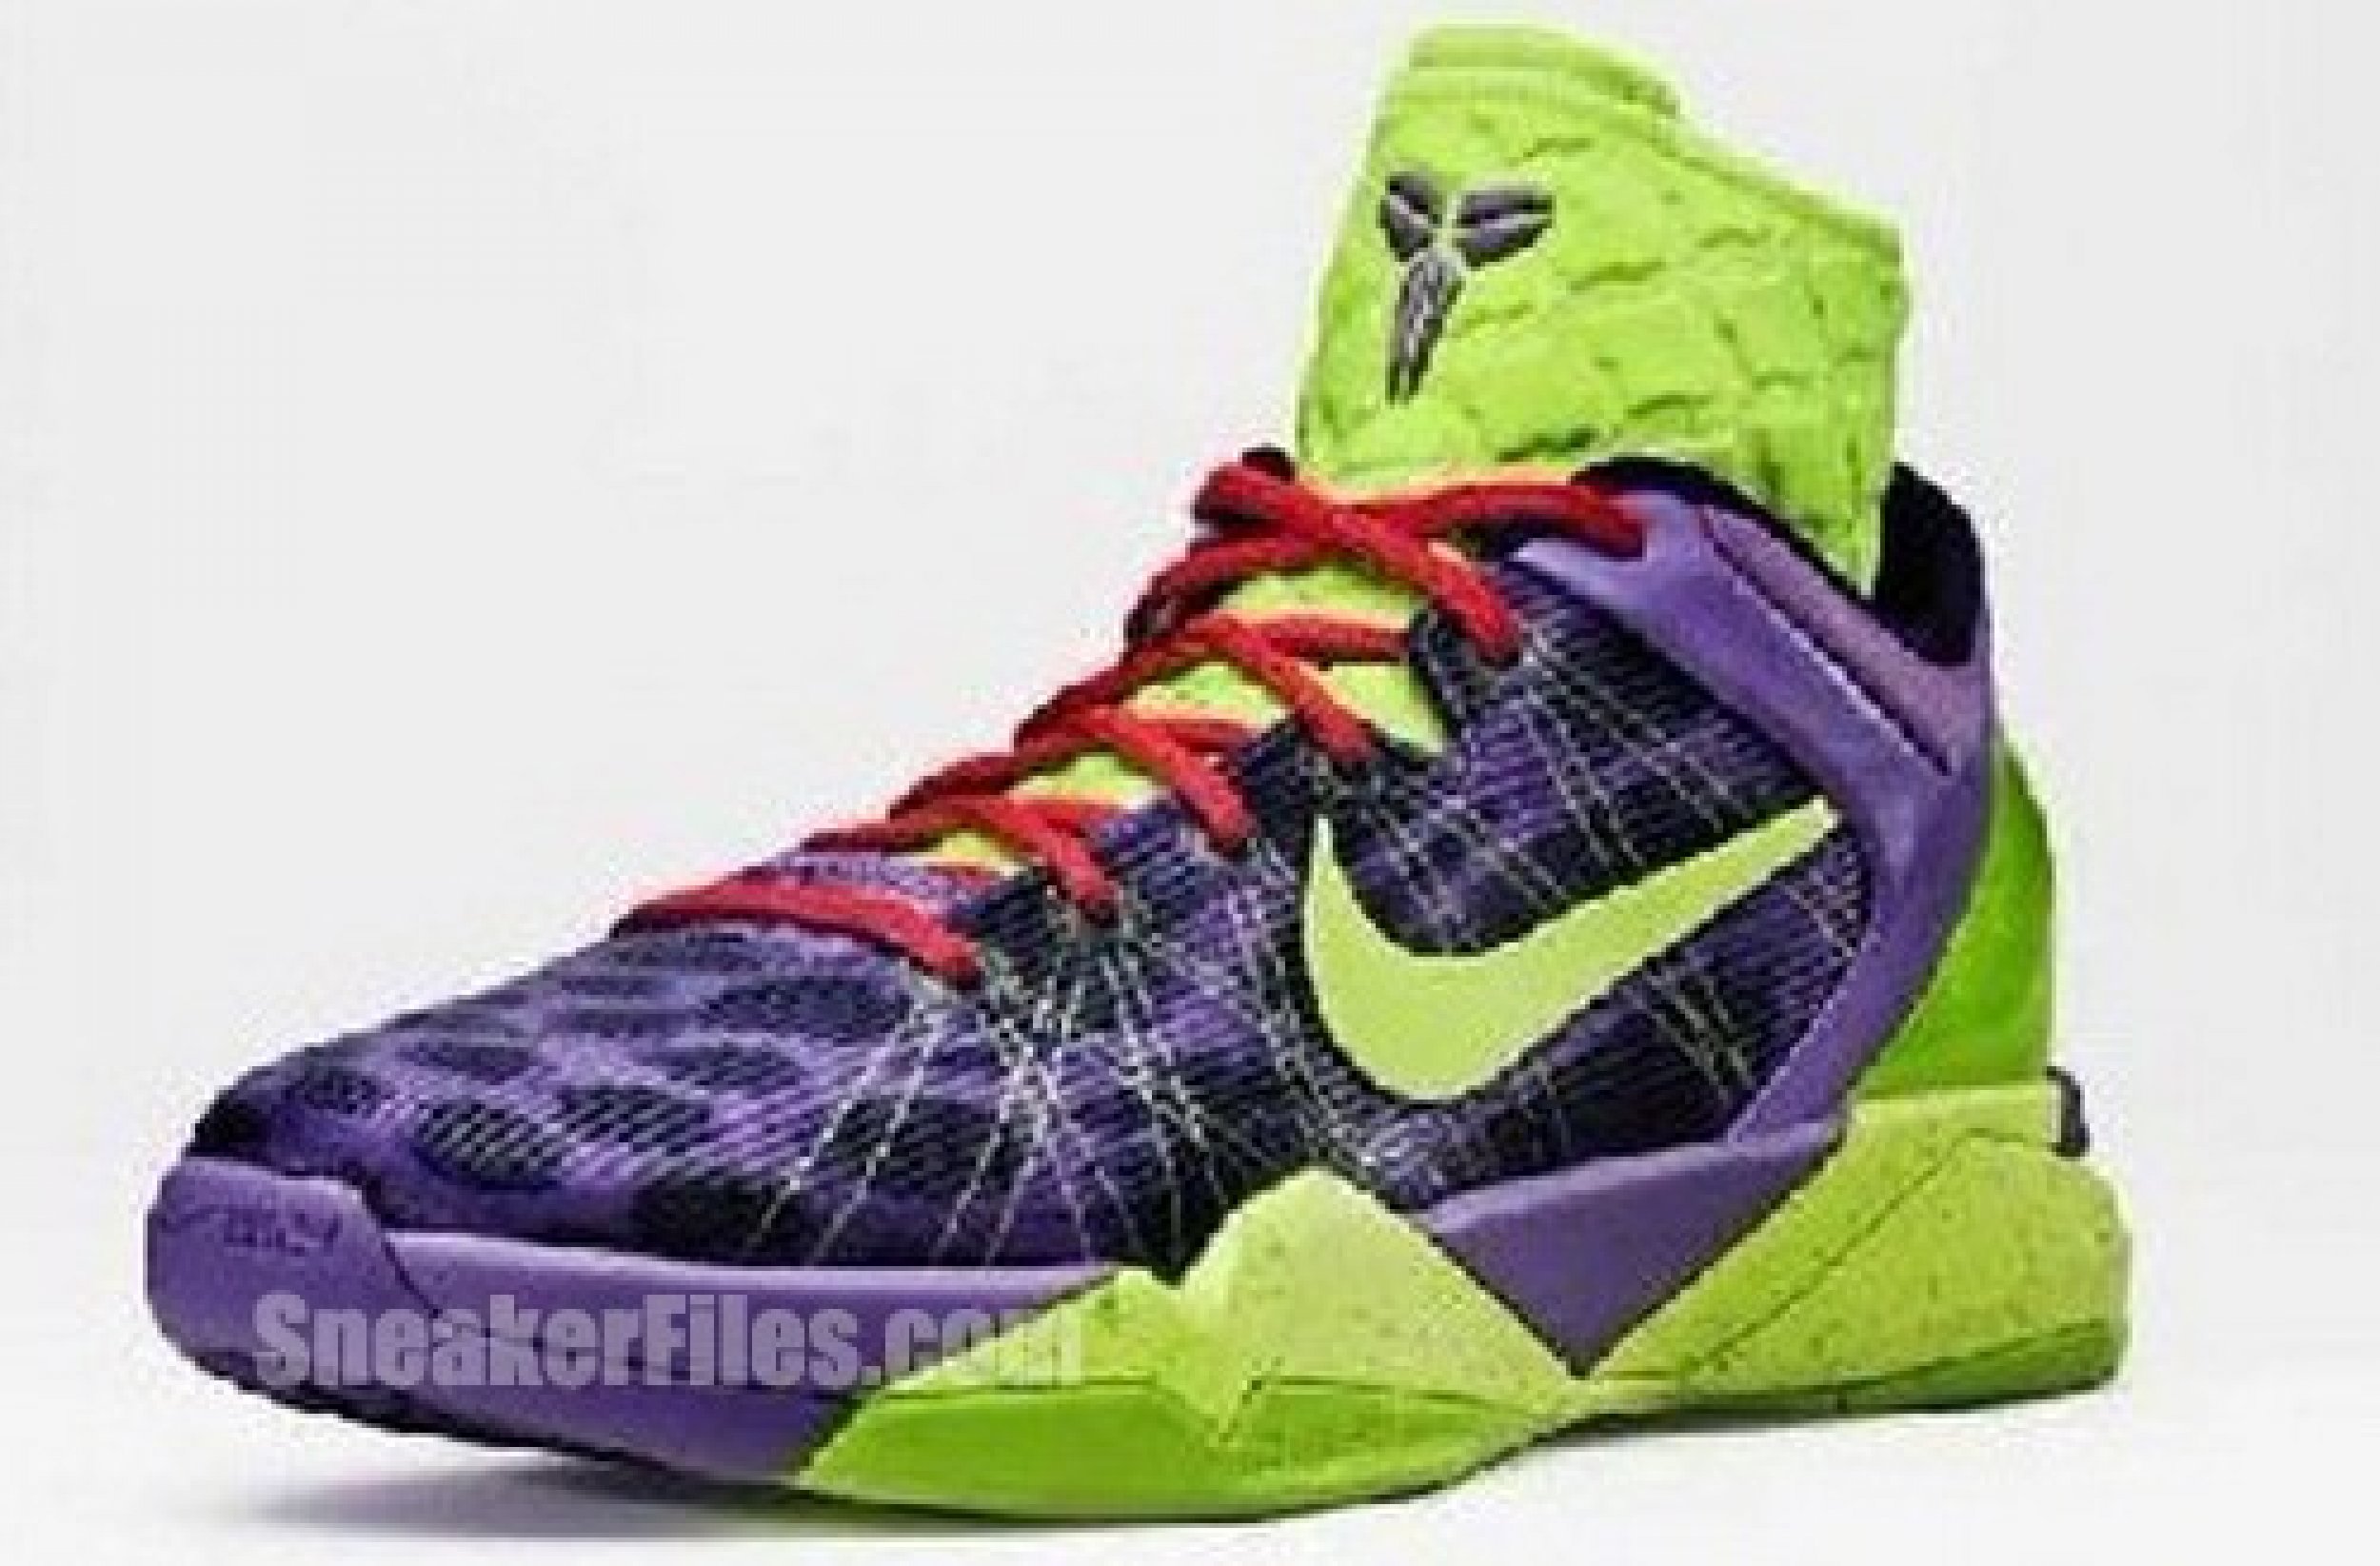 Kobes Grinch shoes